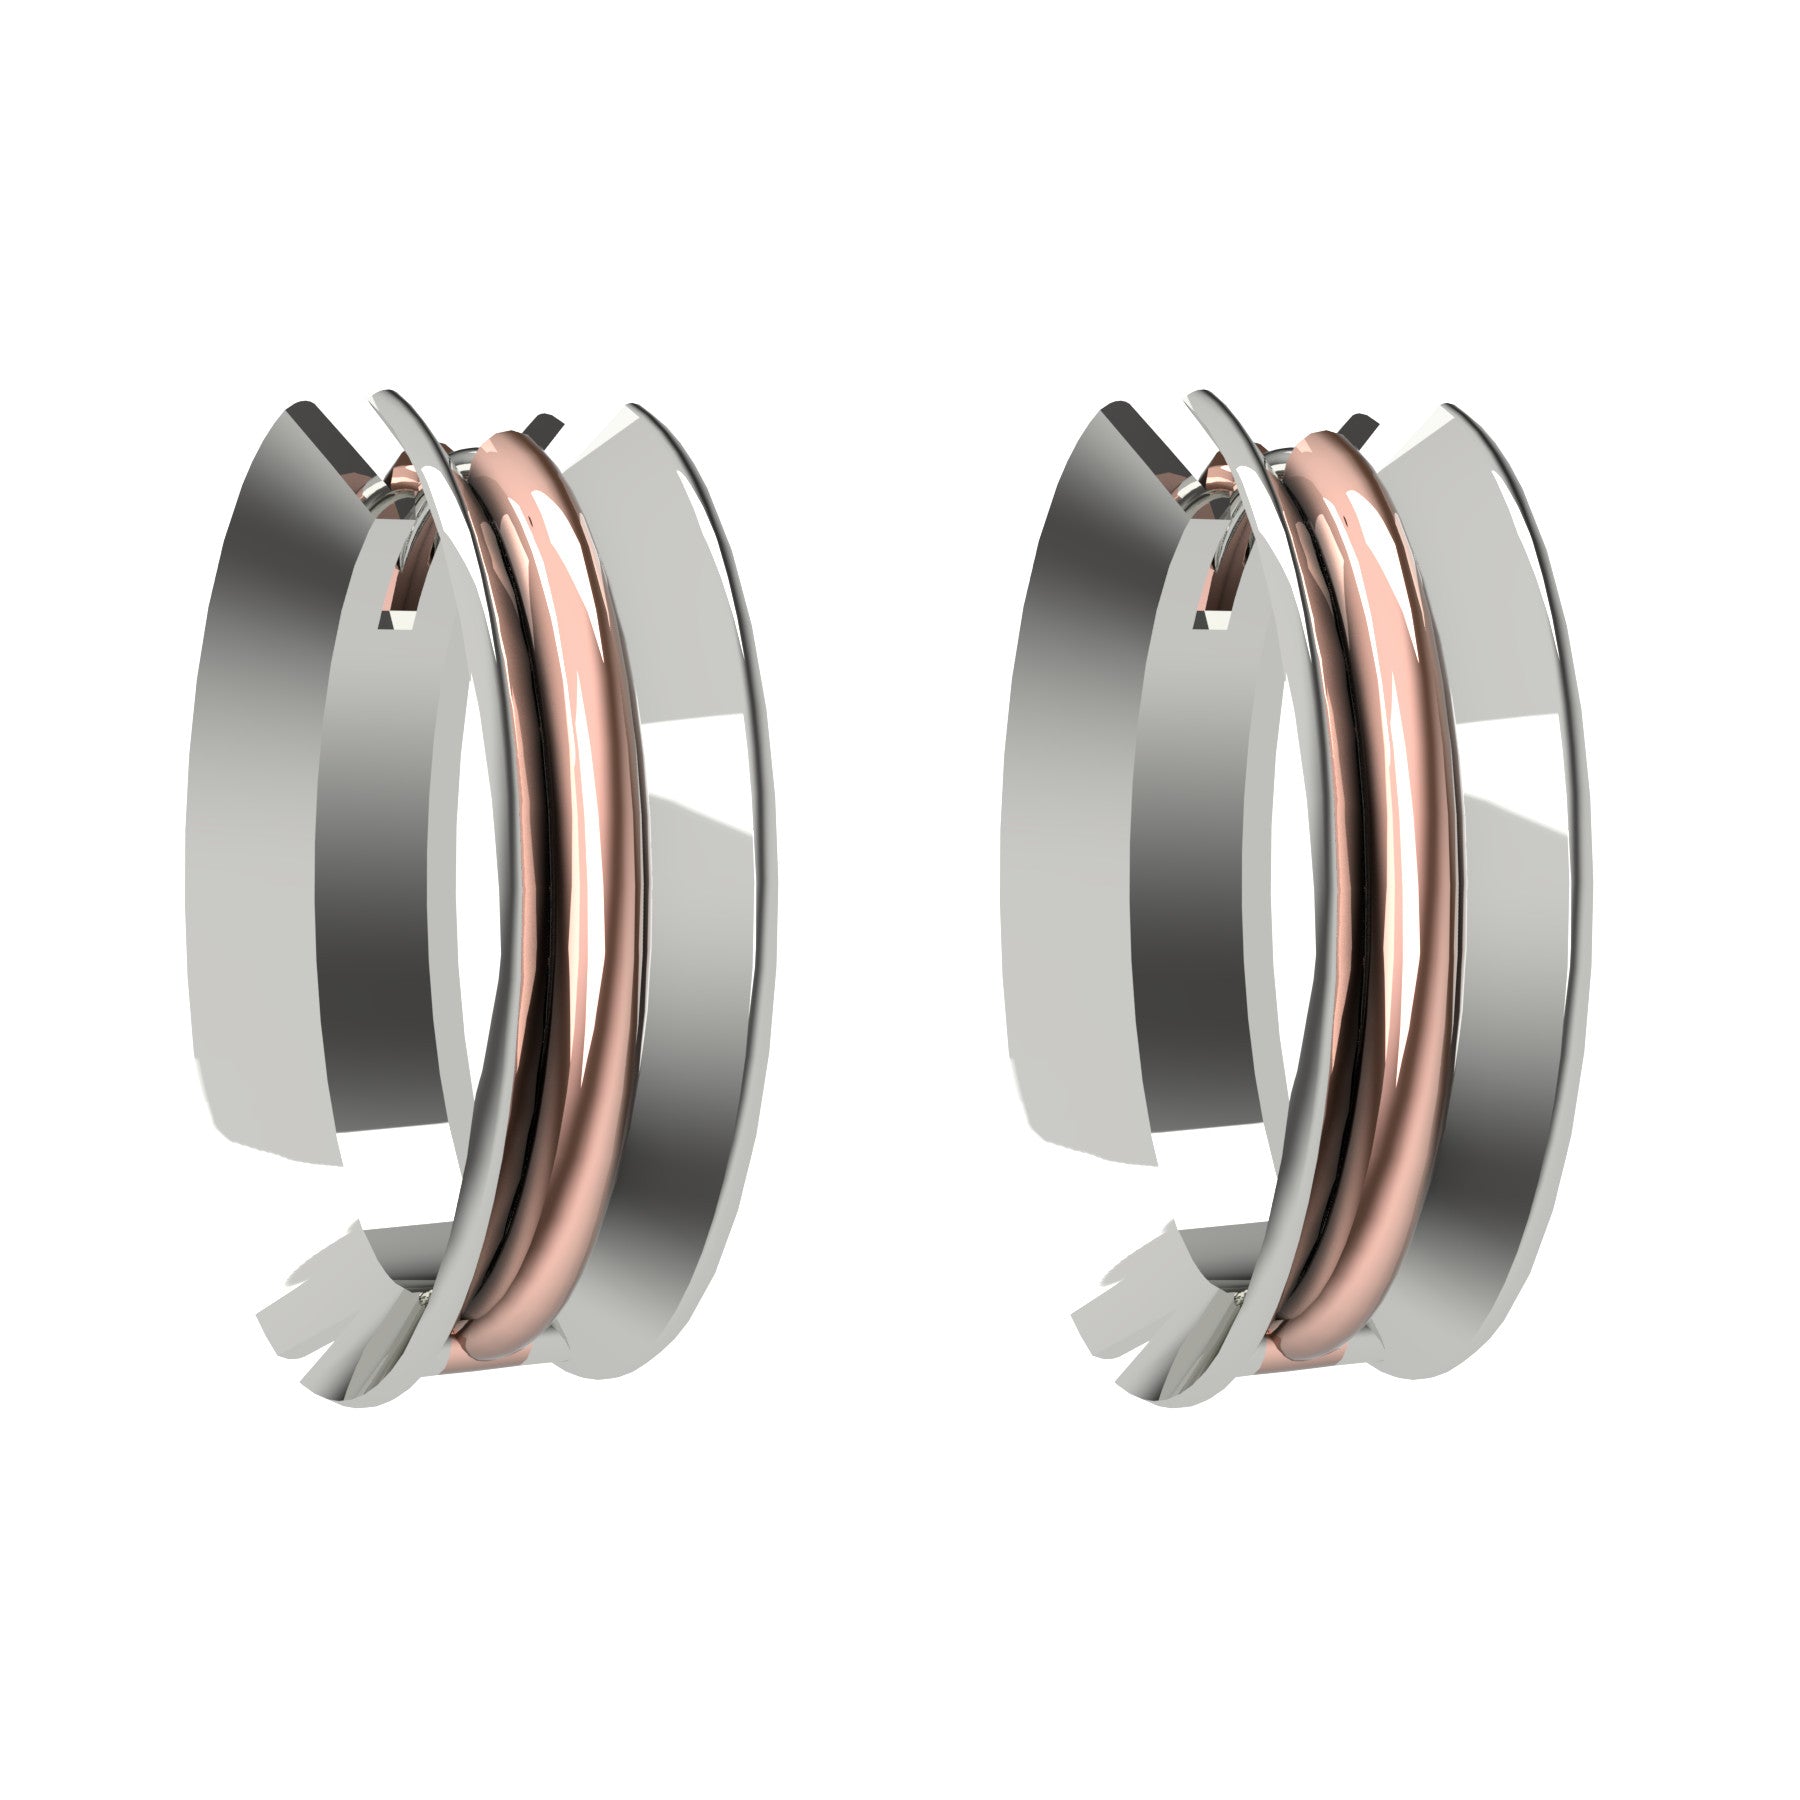 bobo oval earrings, 18 K white and pink gold, weight about 10,9 g (0.38 oz), size 23,5x13,8x8 mm 